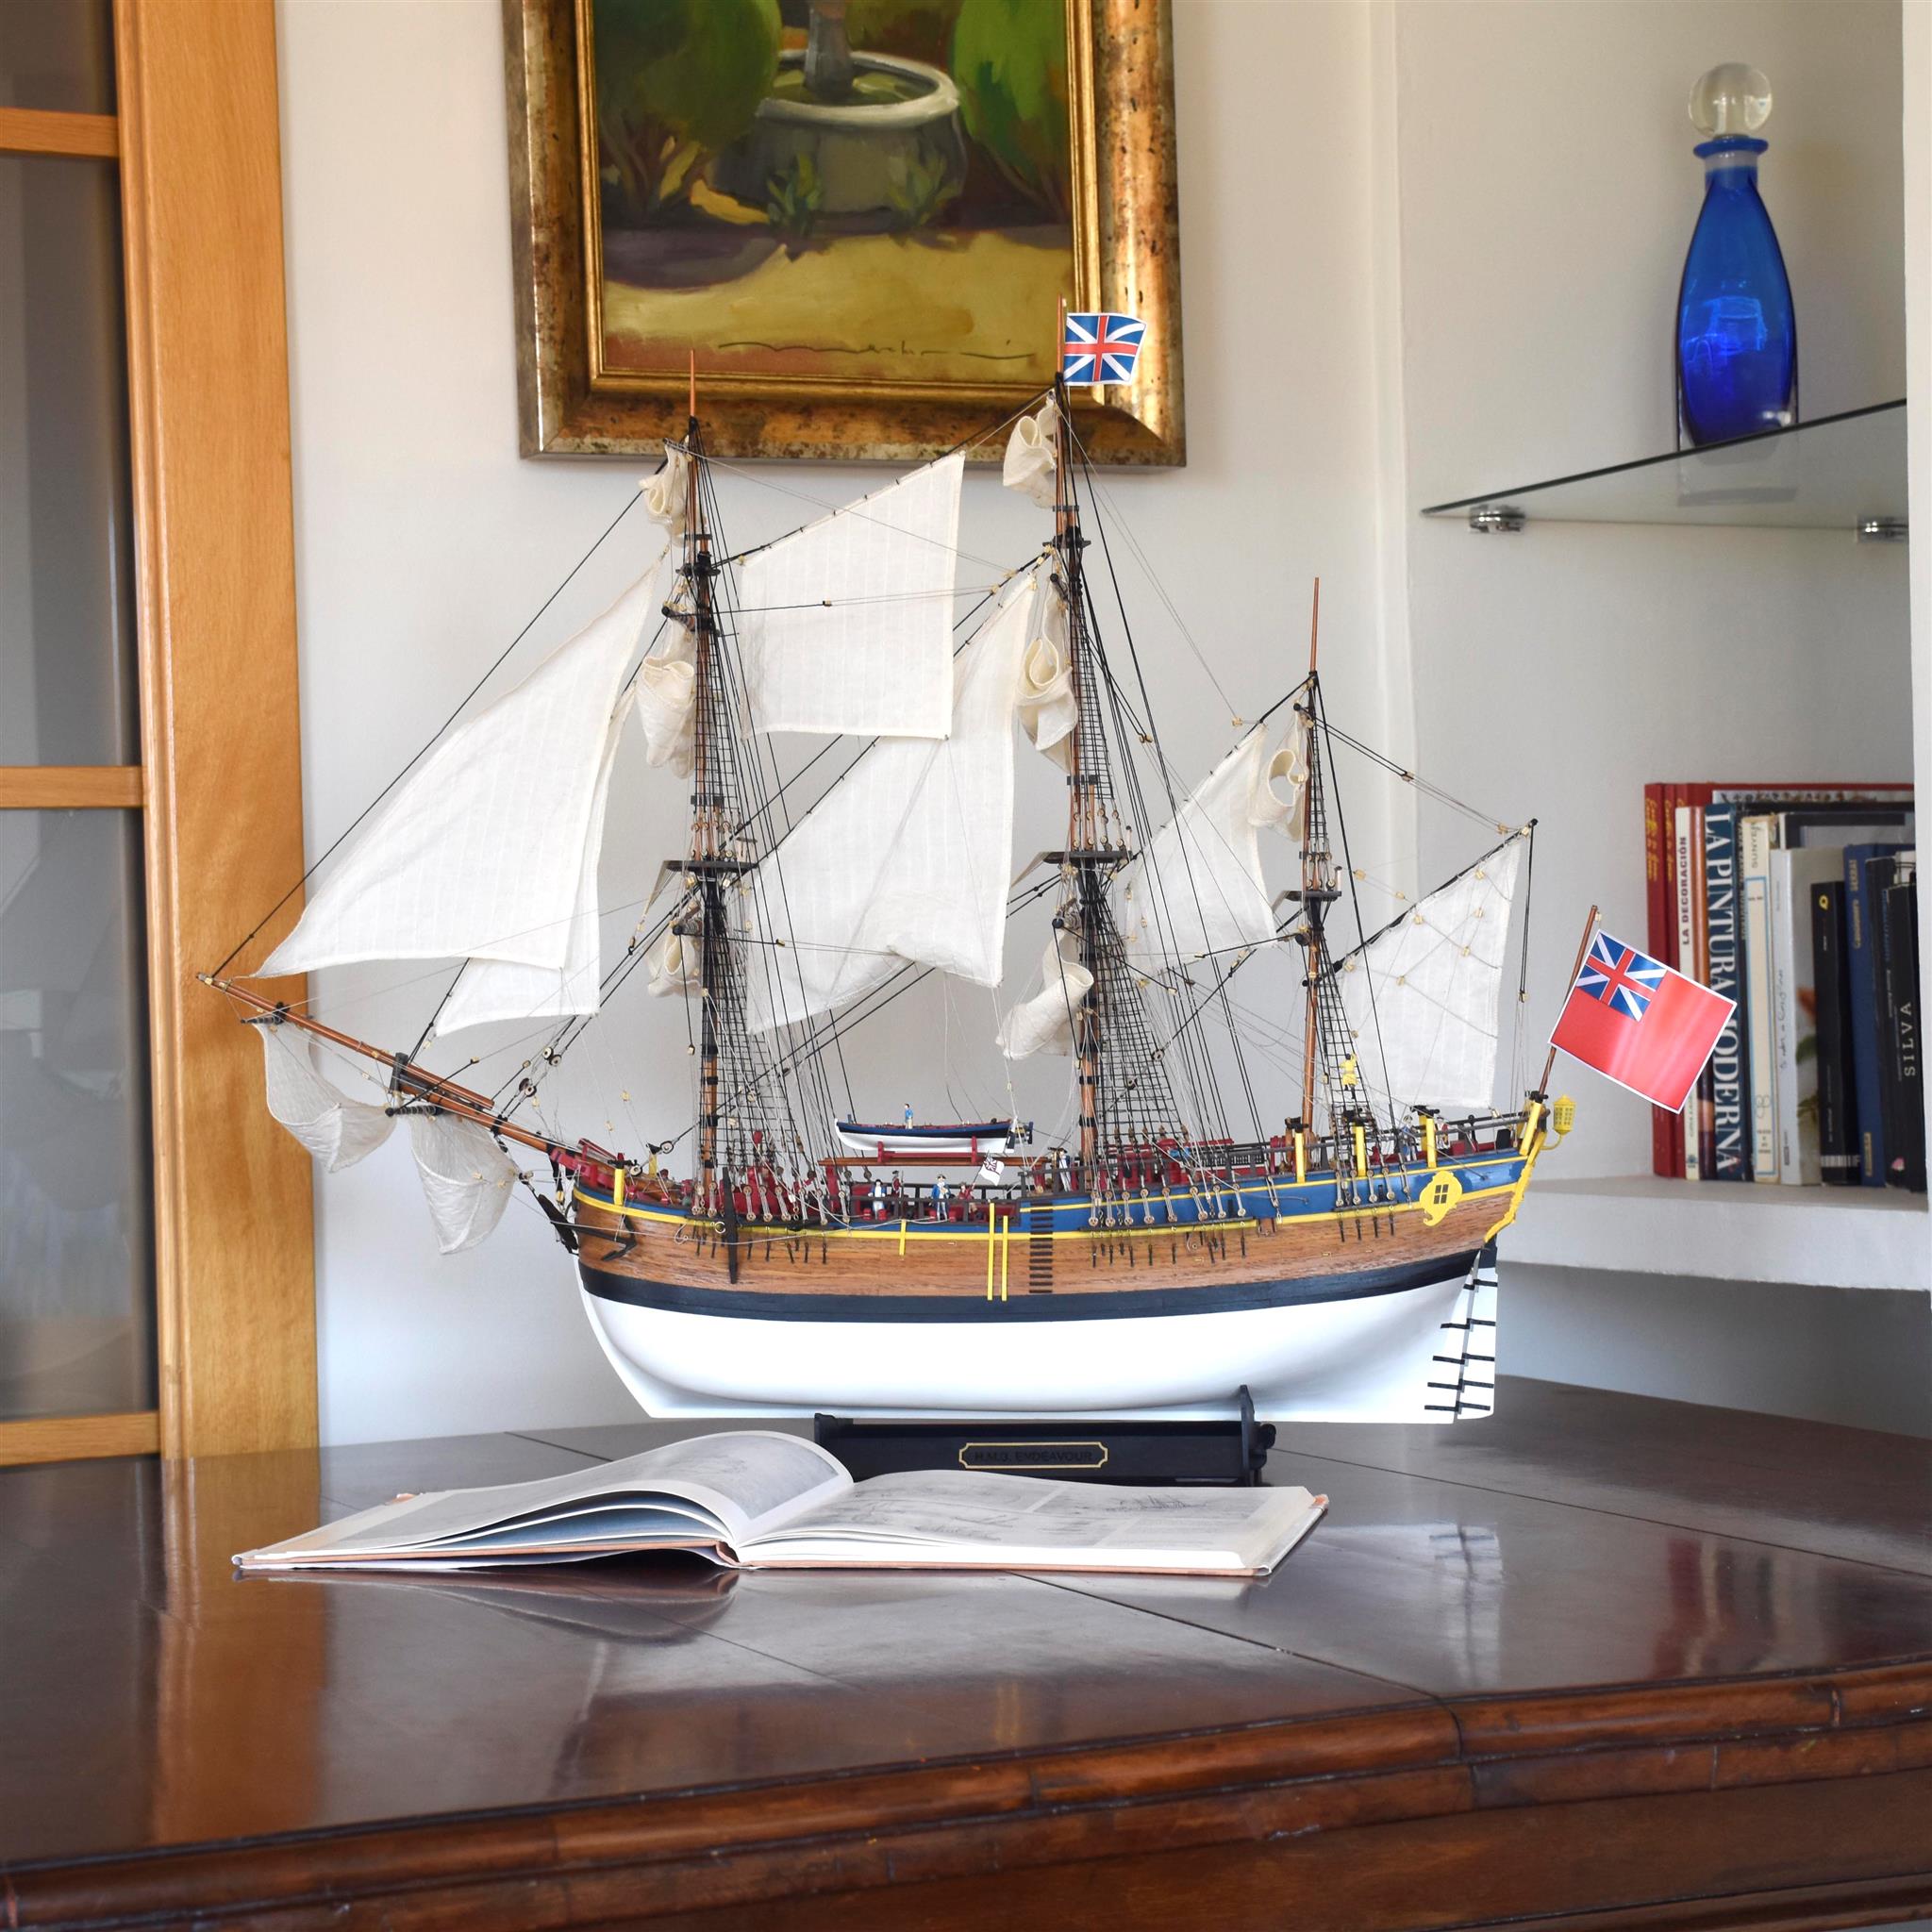 Gift Pack with British Ship Model HMB Endeavour (22520-L) by Artesania Latina.